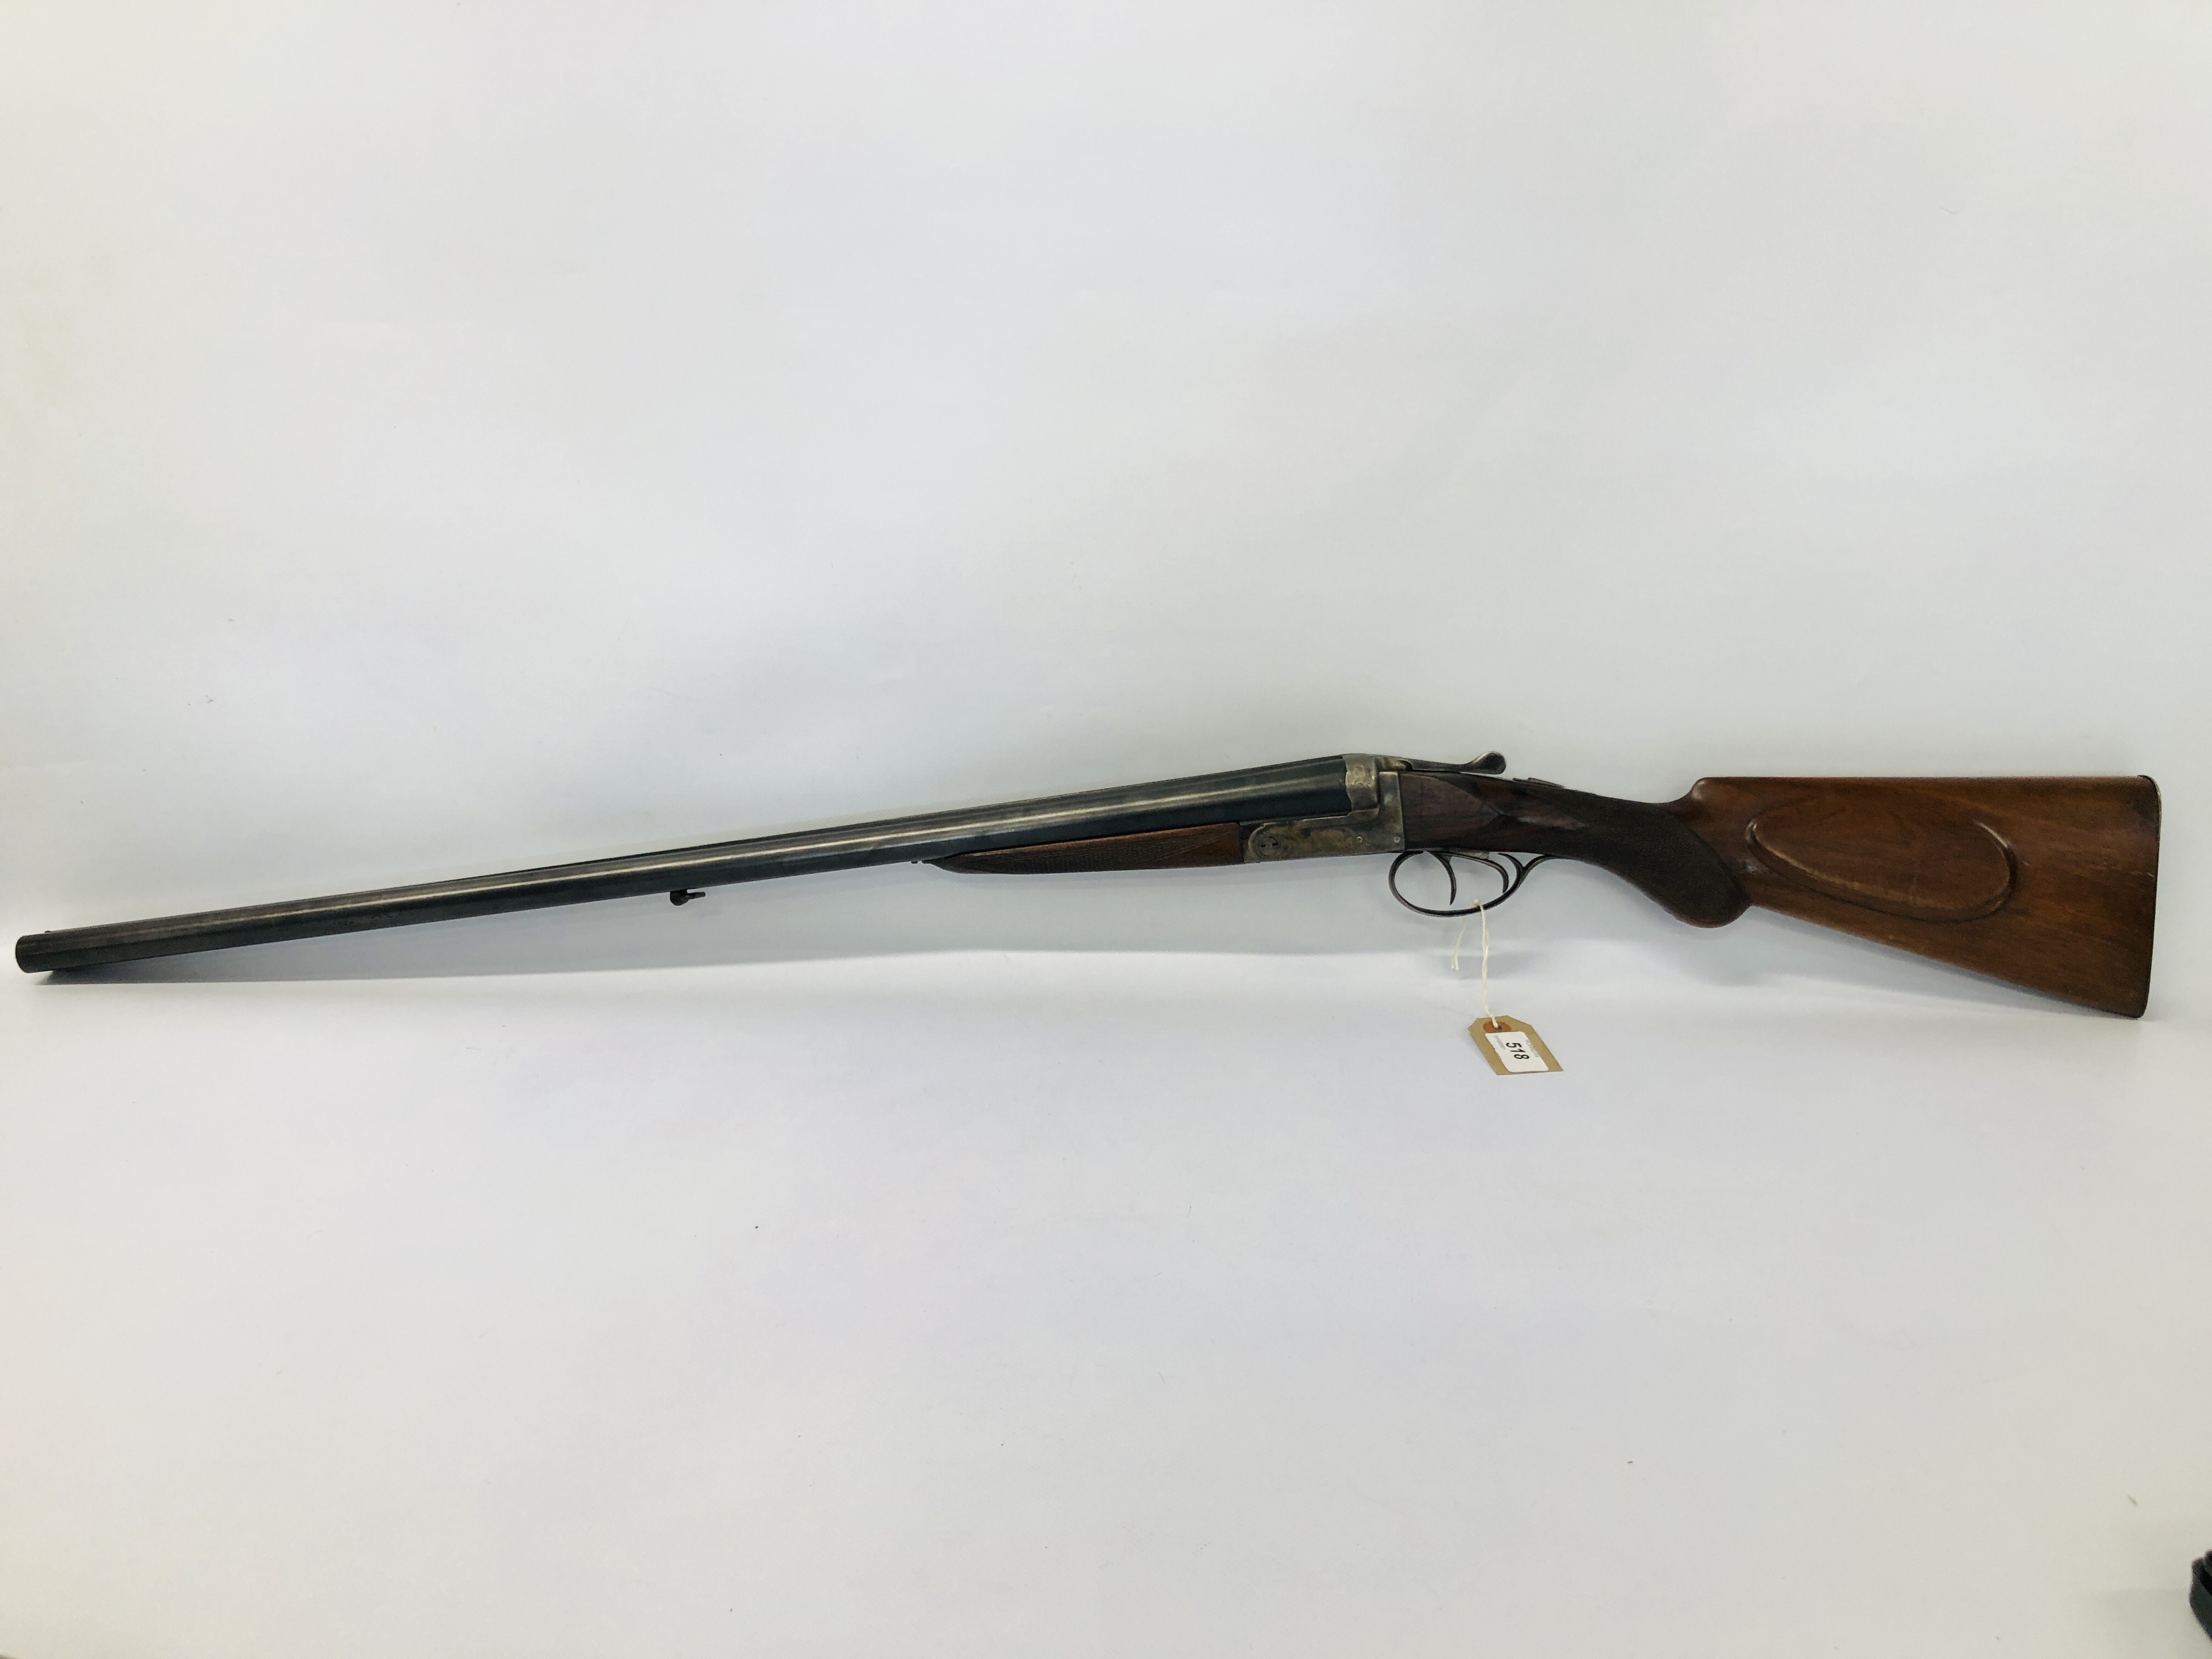 BELGIUM 12 BORE SIDE BY SIDE SHOTGUN # 1478 - (ALL GUNS TO BE INSPECTED AND SERVICED BY QUALIFIED